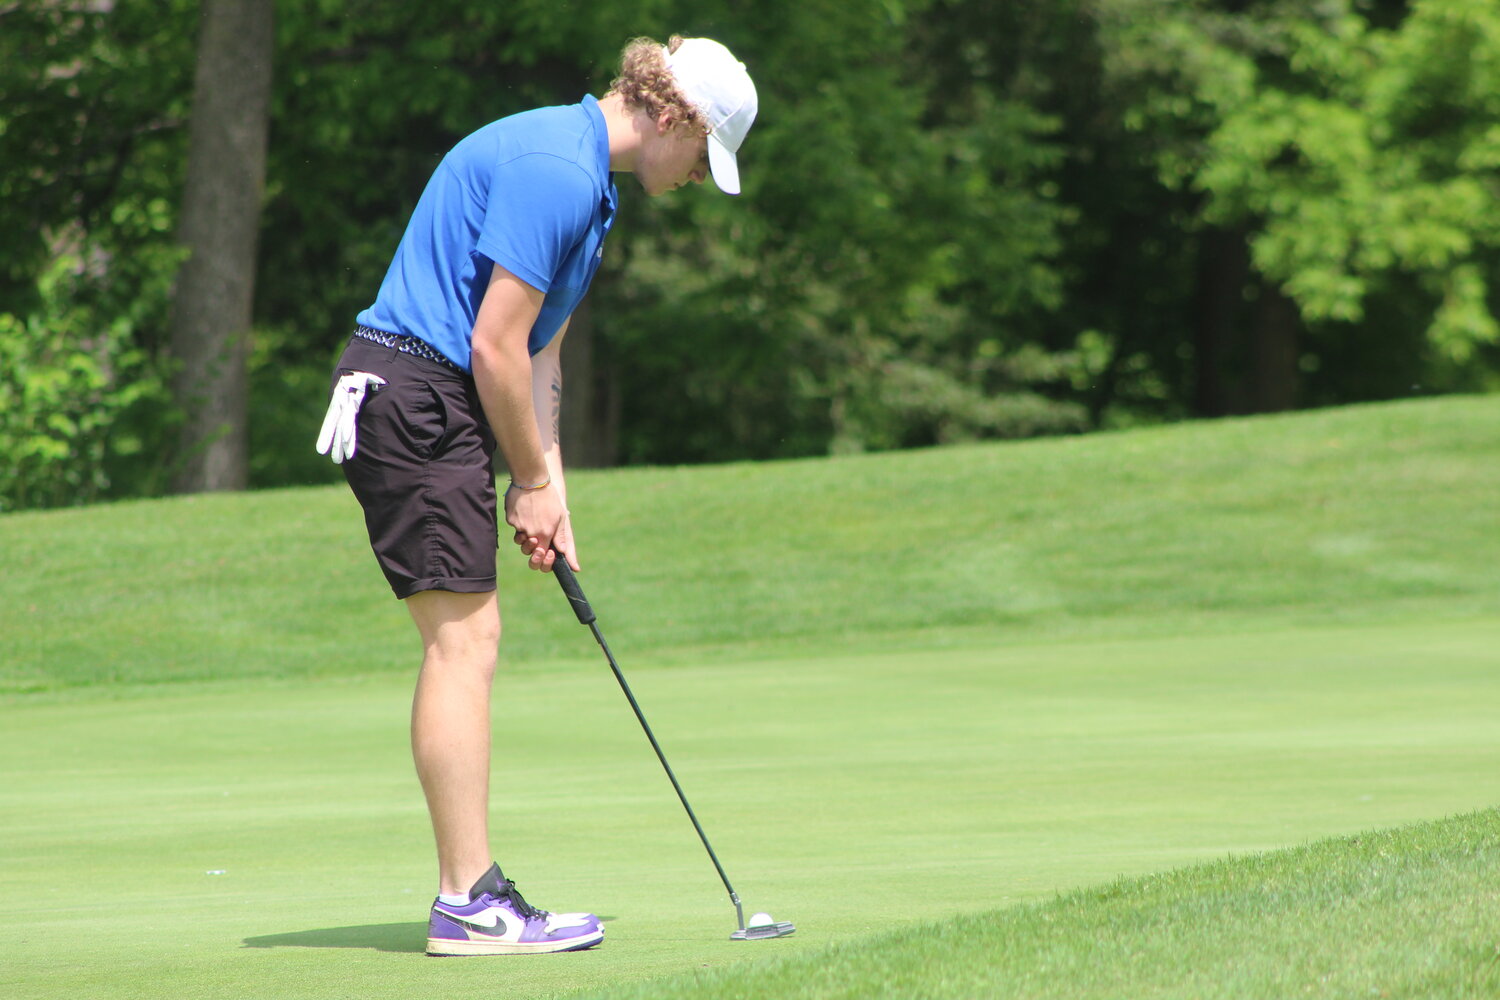 Crawfordsville's Tanner Gilland tied with Jeffery as he shot a 73 and also earned 1st-Team All-SAC